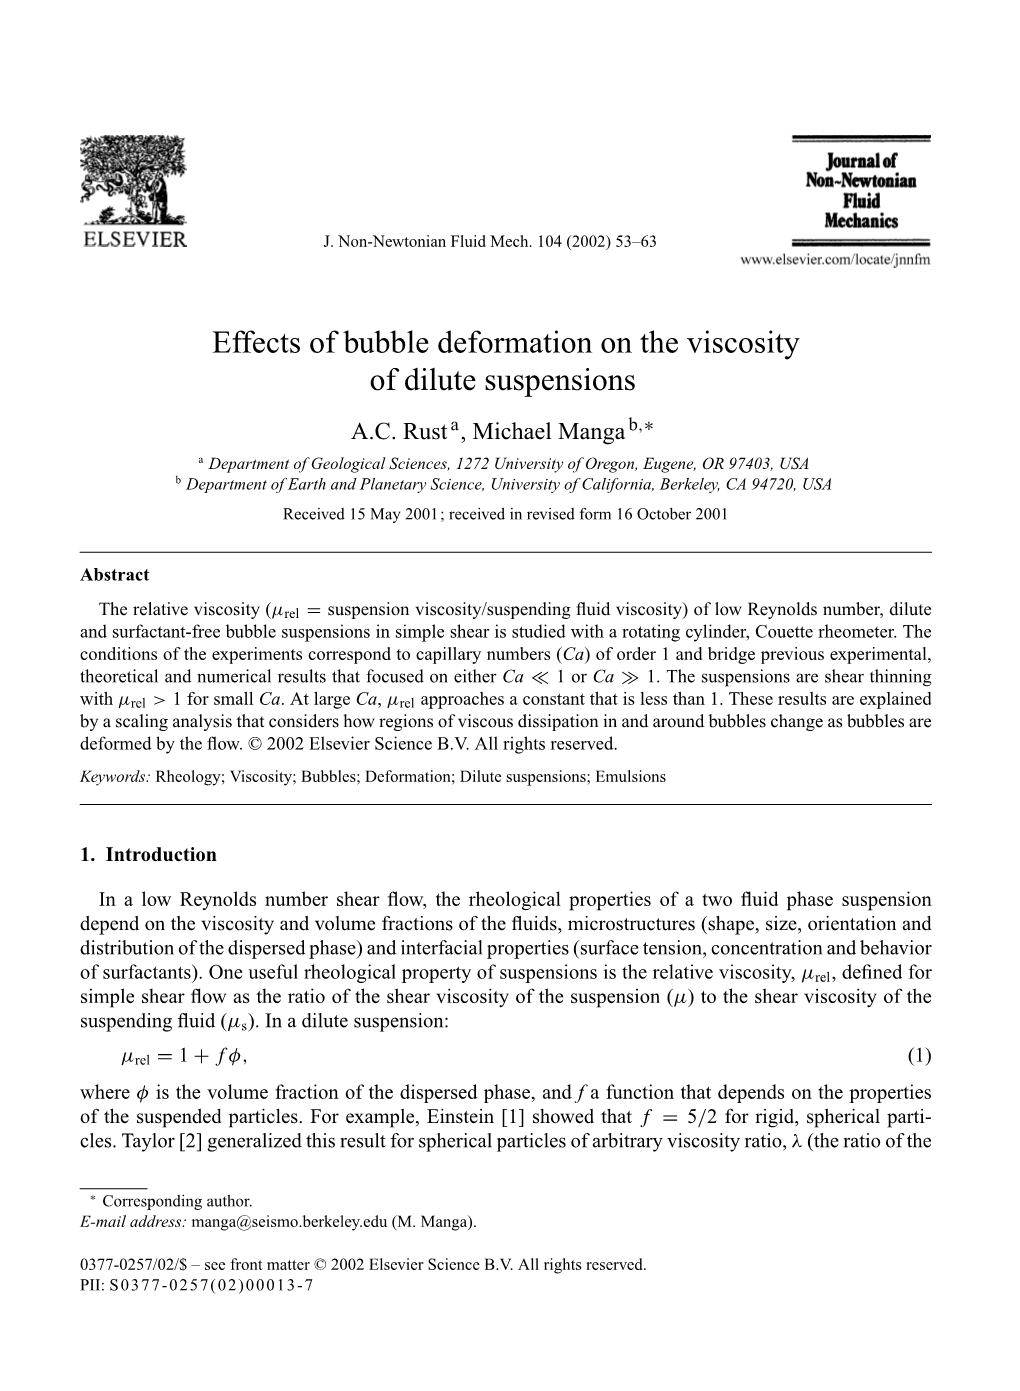 Effects of Bubble Deformation on the Viscosity of Dilute Suspensions A.C